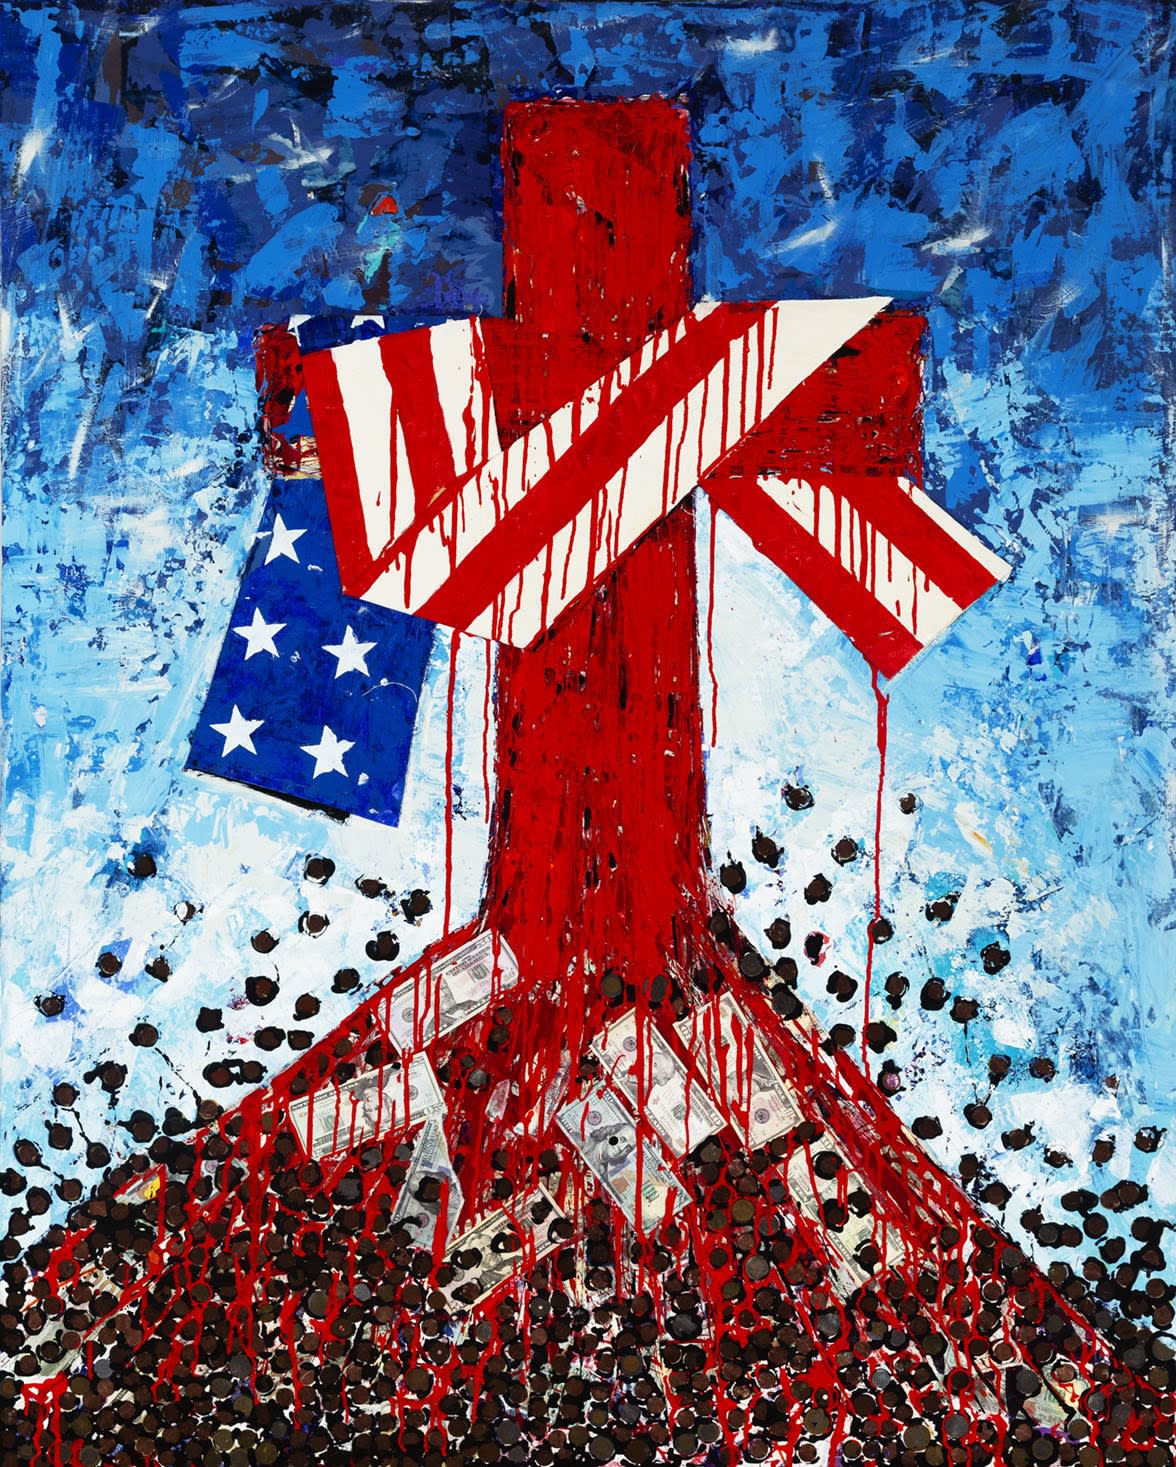 EPHRAIM UREVBU | The Naked Truth: An American Story in White, Red and Blue